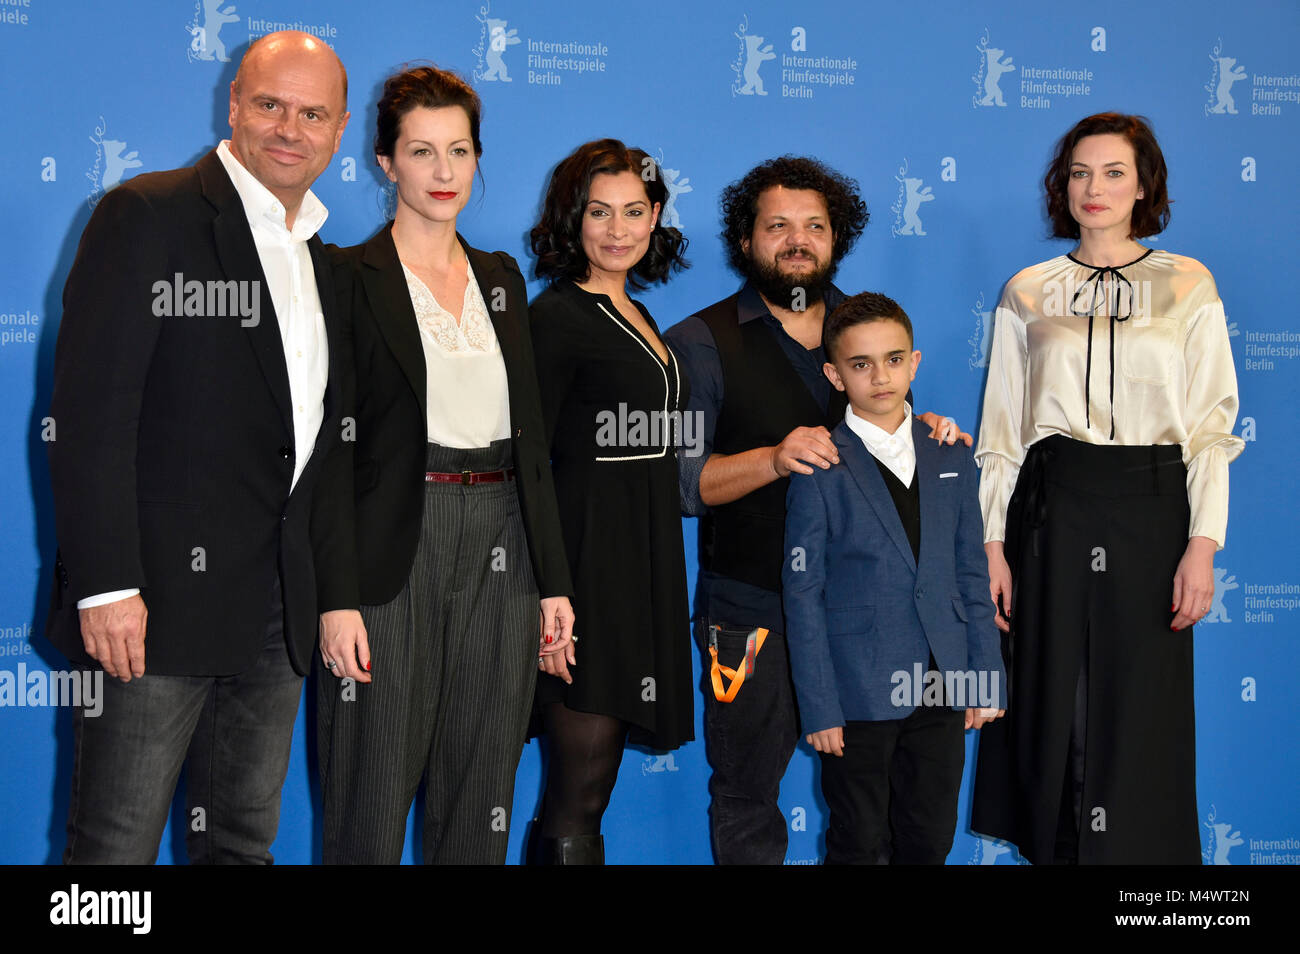 Gabor Ferenczy, Andrea Taschler, Lidia Danis, Arpad Bogdan, Milan Csordas and Anna Marie Cseh during the 'Genezis' photocall at the 68th Berlin International Film Festival / Berlinale 2018 at Hotel Grand Hyatt on February 18 in Berlin, Germany. Credit: Geisler-Fotopress/Alamy Live News Stock Photo